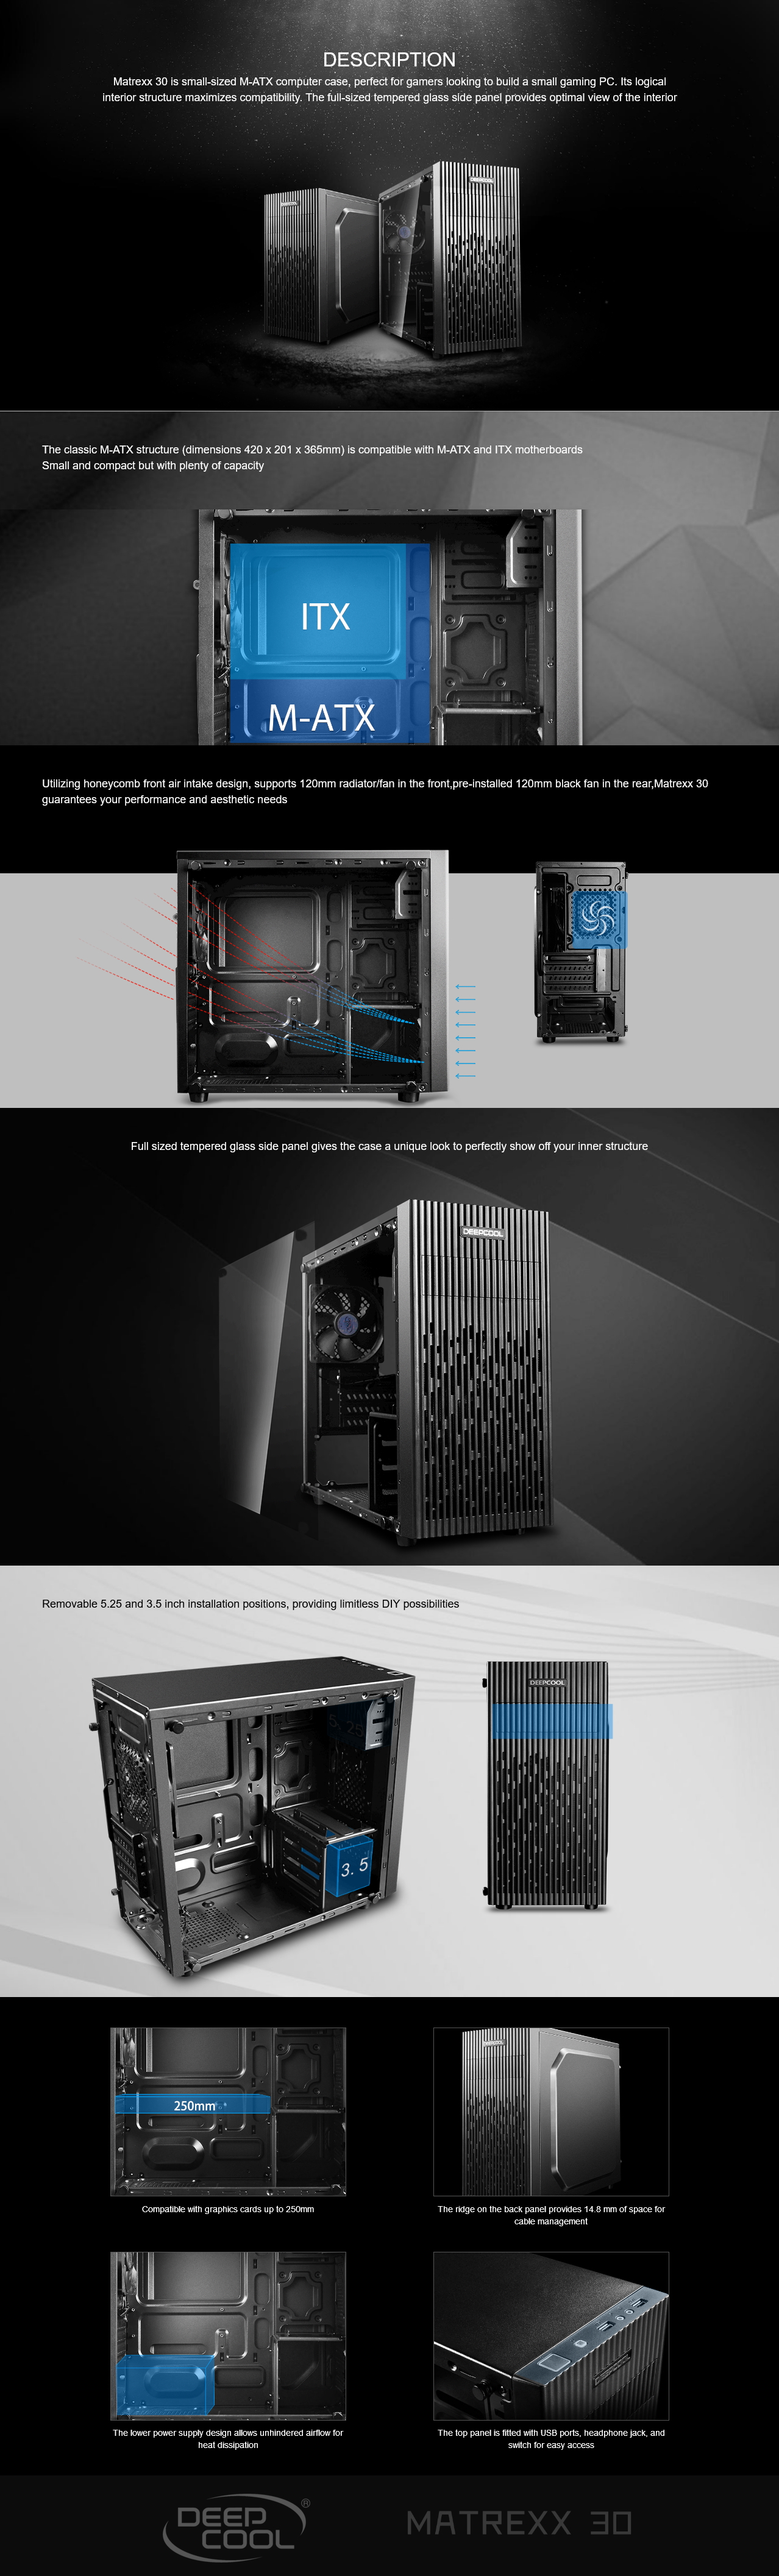 A large marketing image providing additional information about the product DeepCool Matrexx 30 Micro Tower Case - Black - Additional alt info not provided